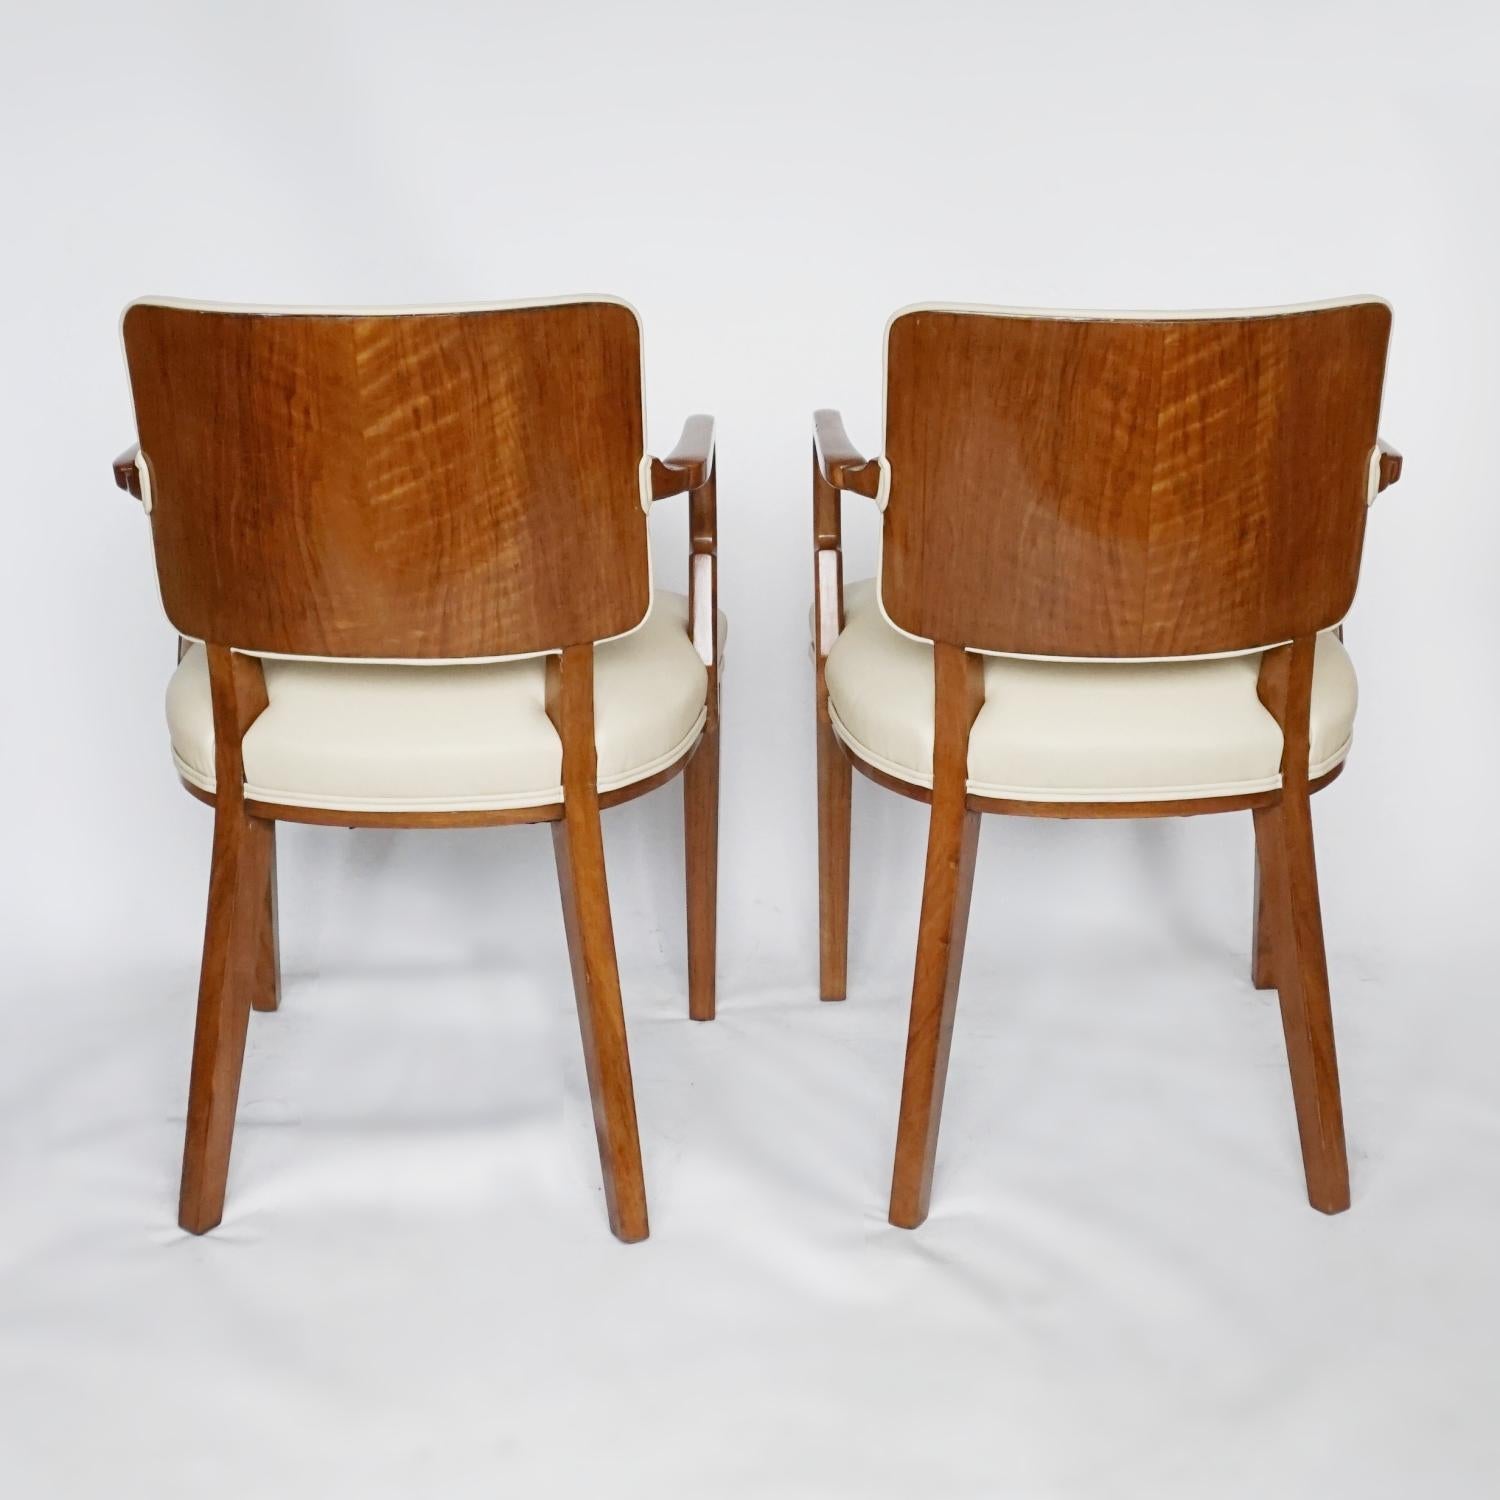 Pair of Art Deco Desk Chairs by Heal's of London Circa 1935 English 4